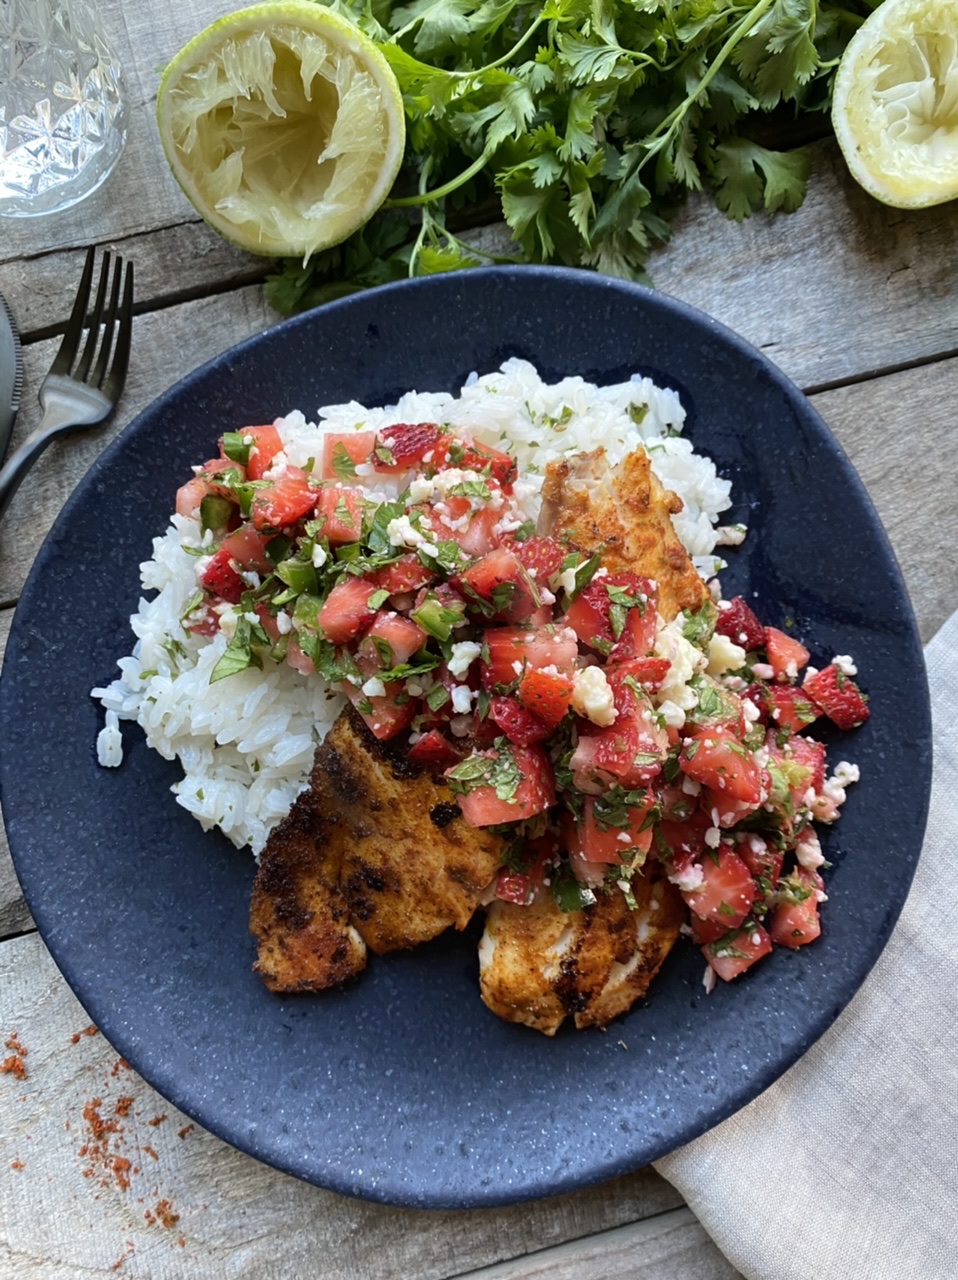 AFAB1E20 51EE 4CBB B14C 3132CC221D4A - Citrusy Pan-Seared Tilapia with Strawberry Salsa & Coconut Rice